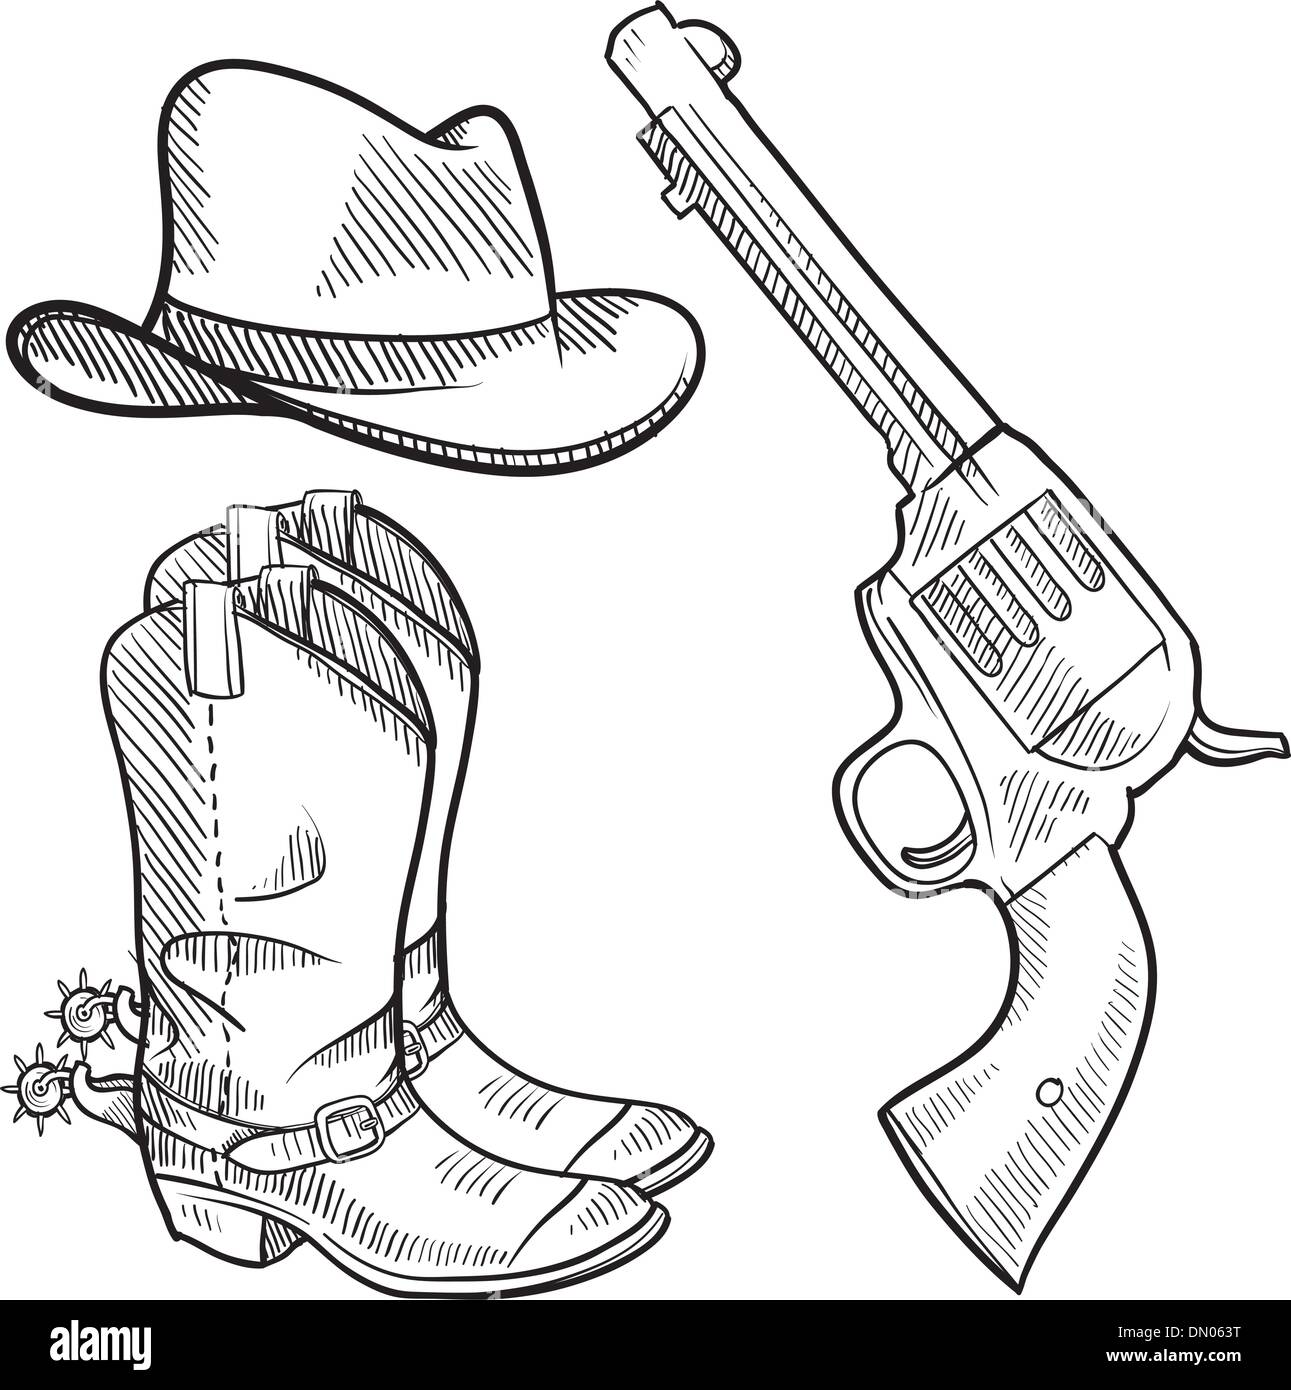 Cowboy objects sketch Stock Vector